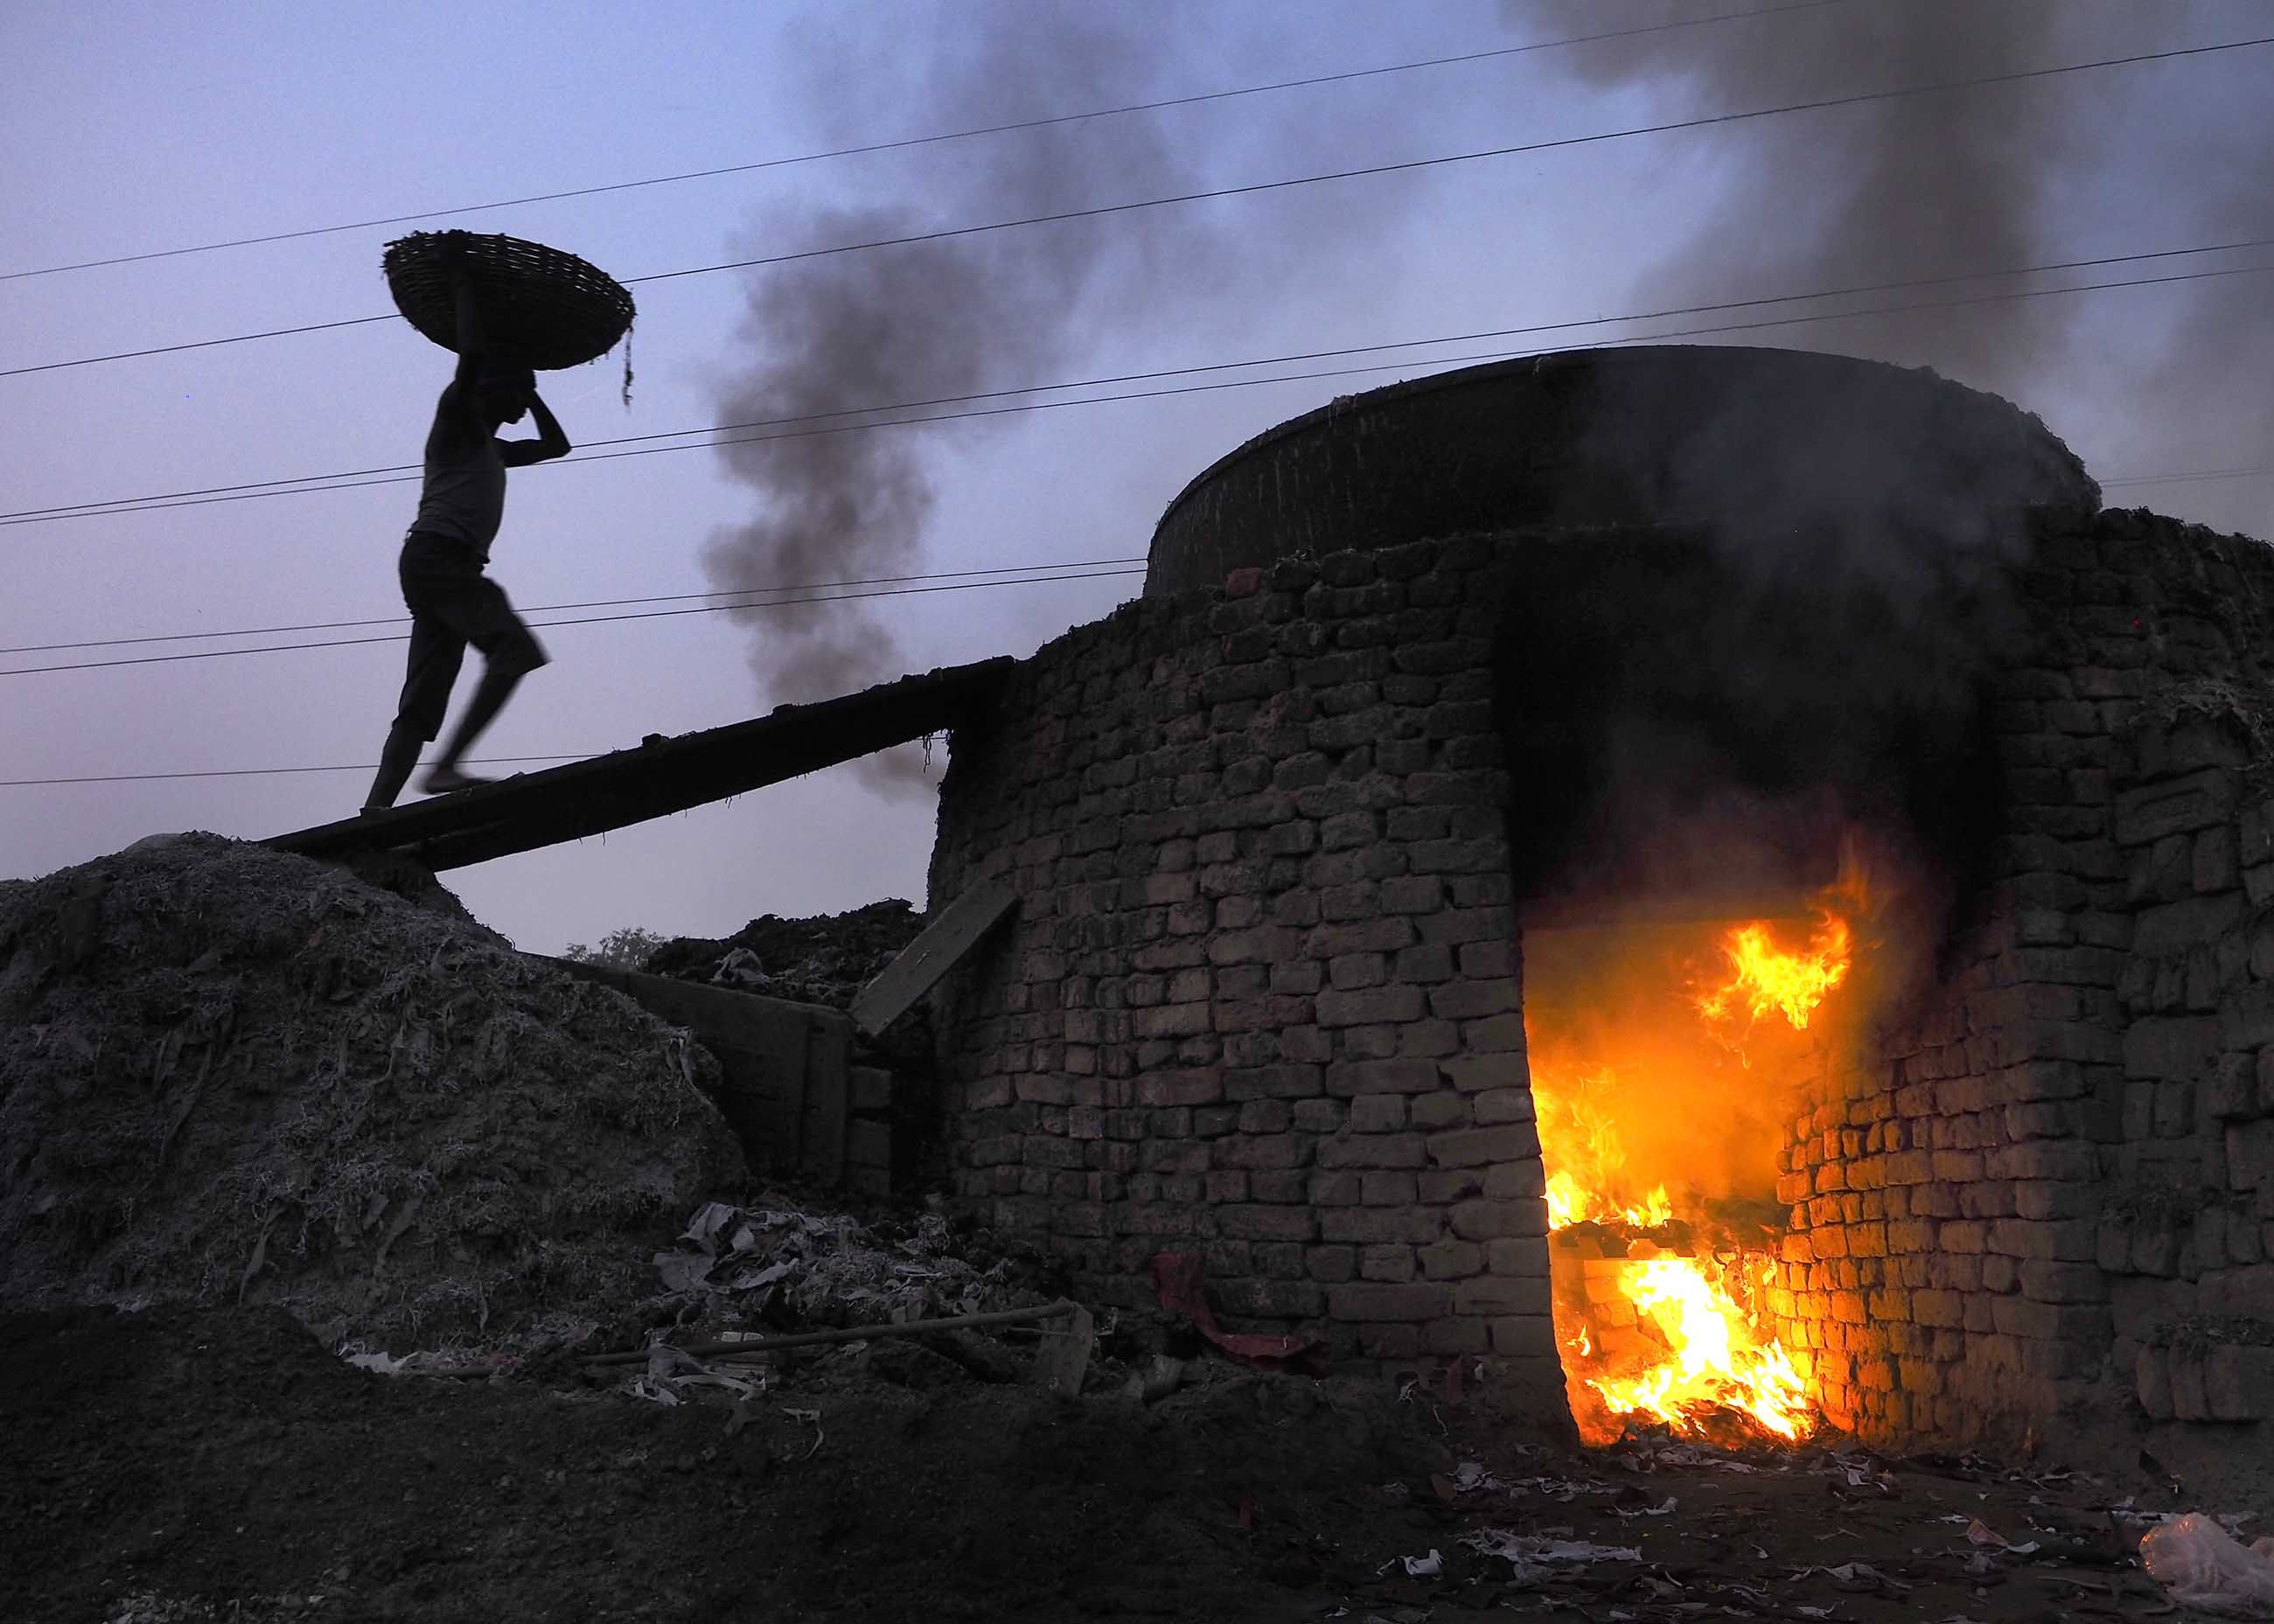 Primitive factories boil leather scraps to make glue. Here, a worker carries a basket of scraps to an enormous cauldron atop a brick oven at a glue factory near the Kolkata Leather Complex in India. Image by Larry C. Price. Bangladesh, 2016.